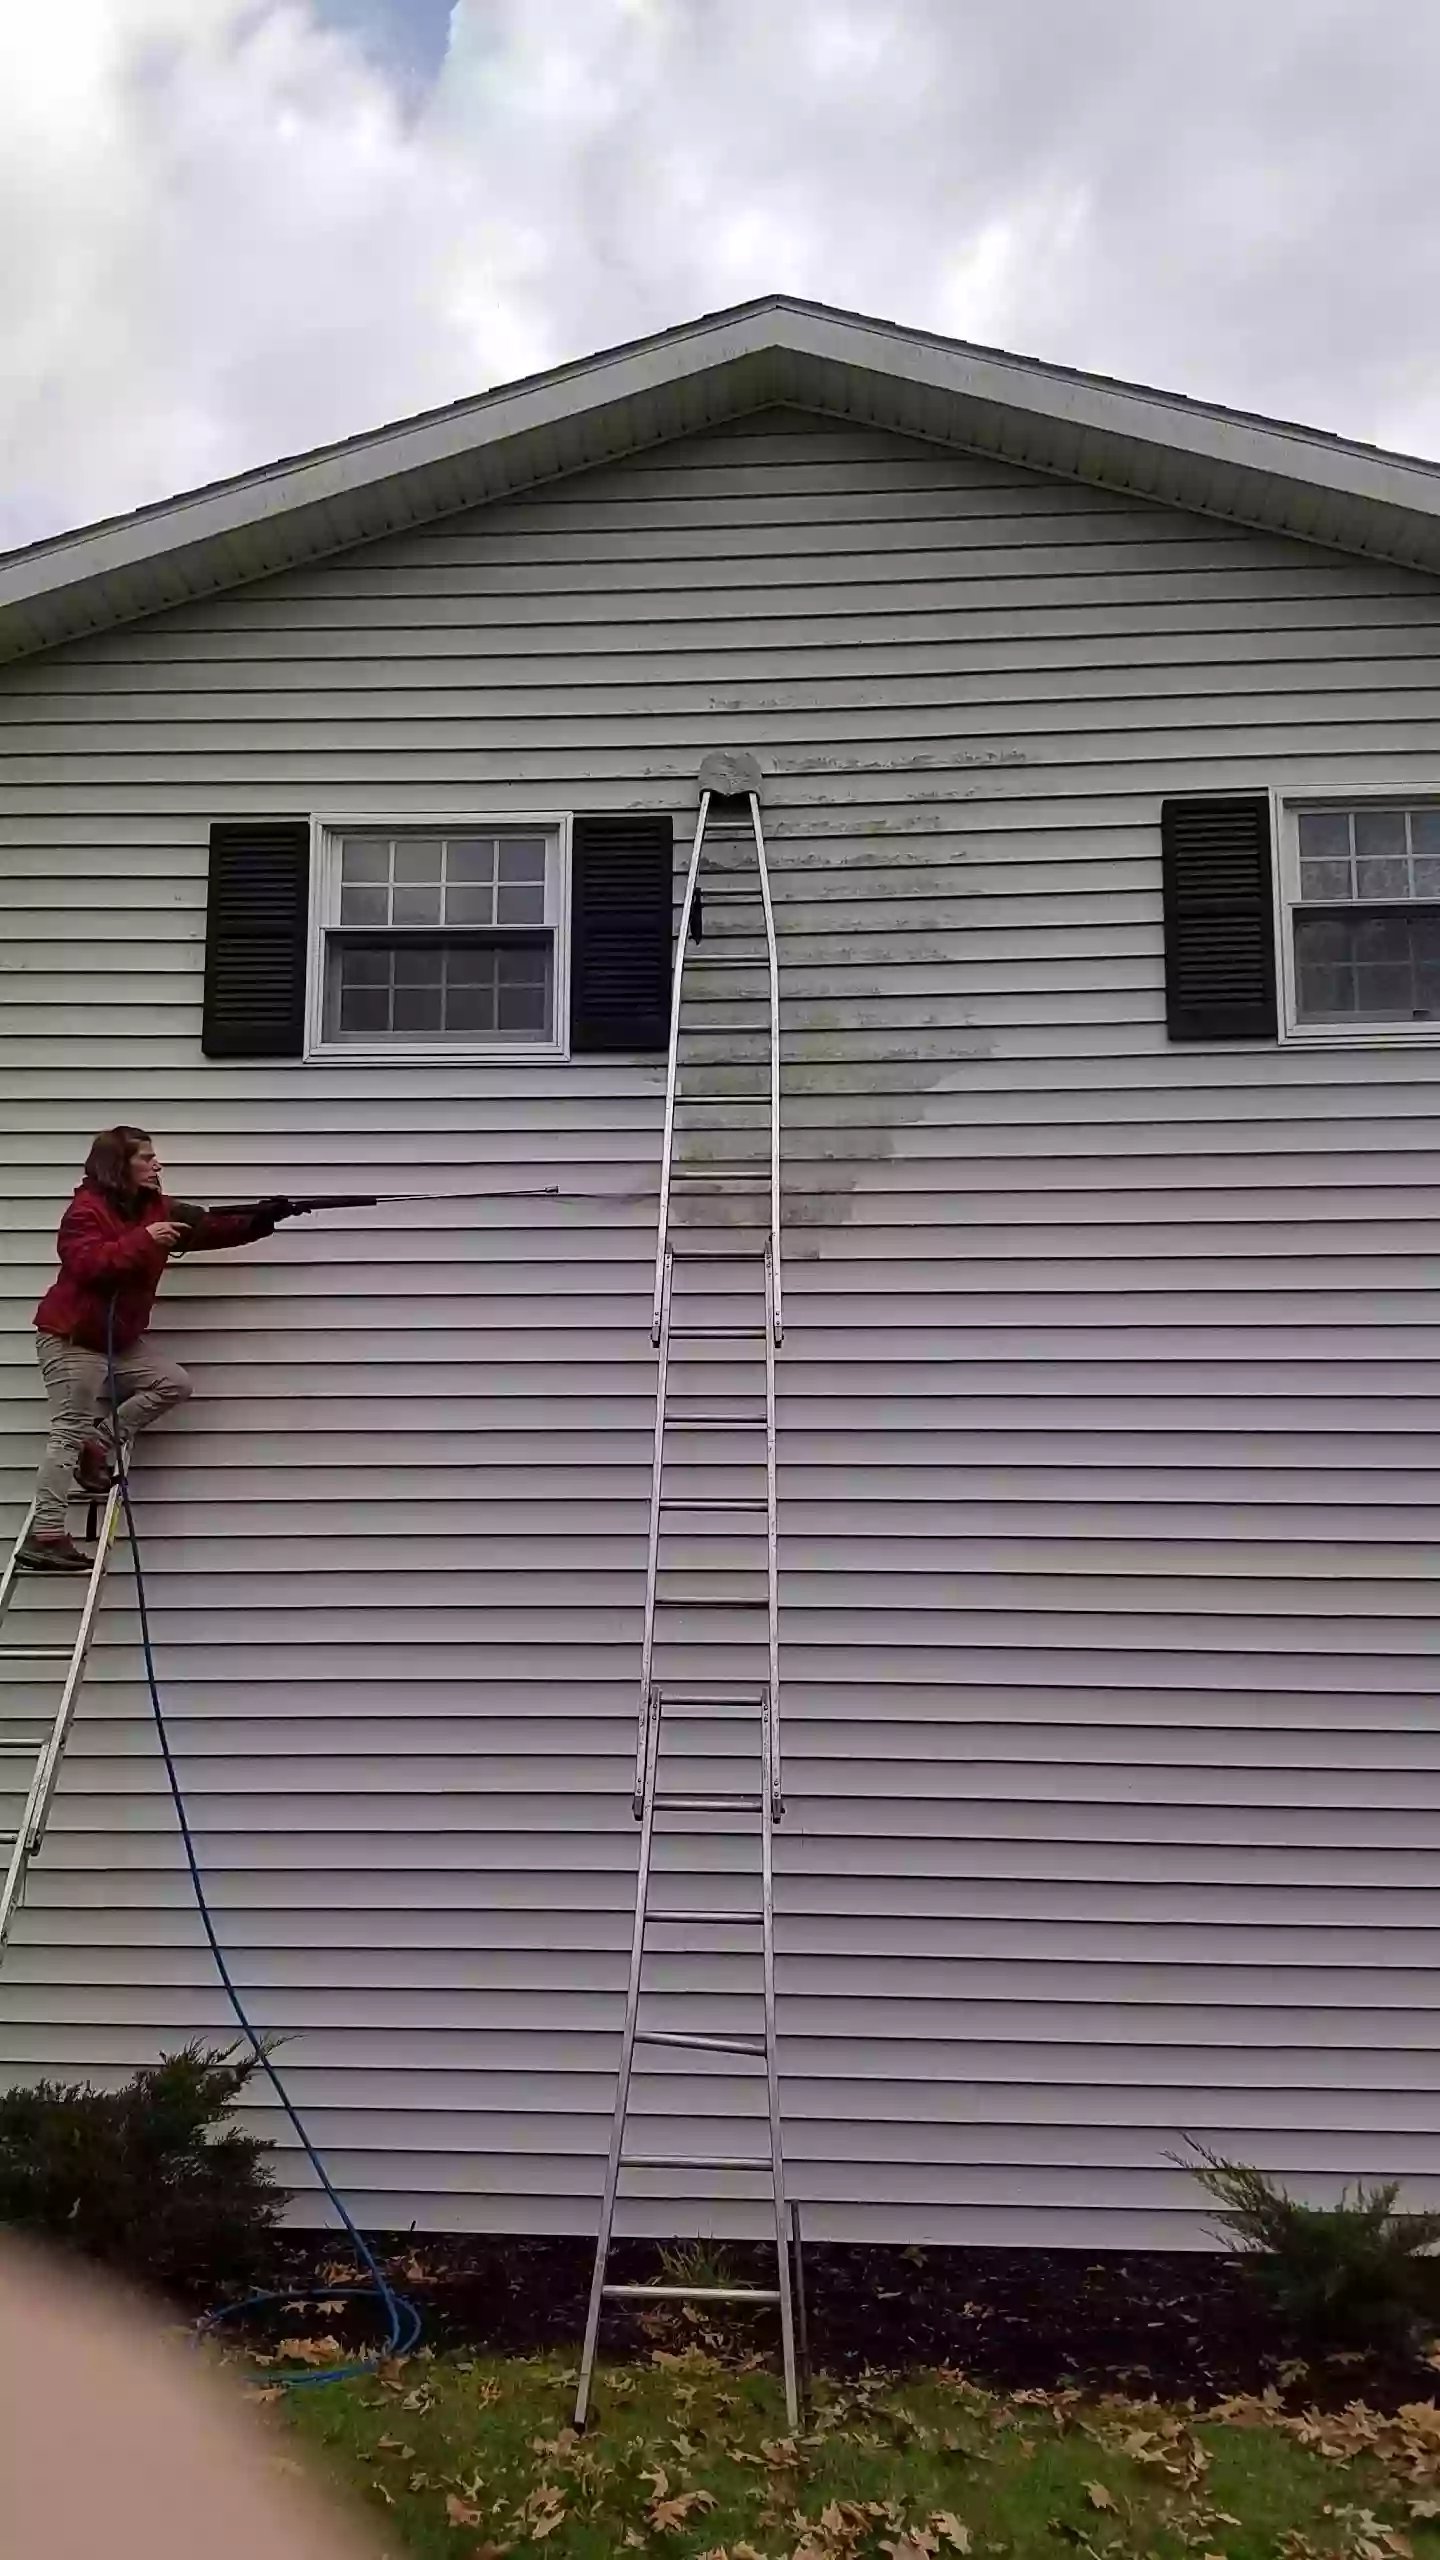 Squeaky's ll Window Cleaning, Gutter Cleaning & Pressure Washing